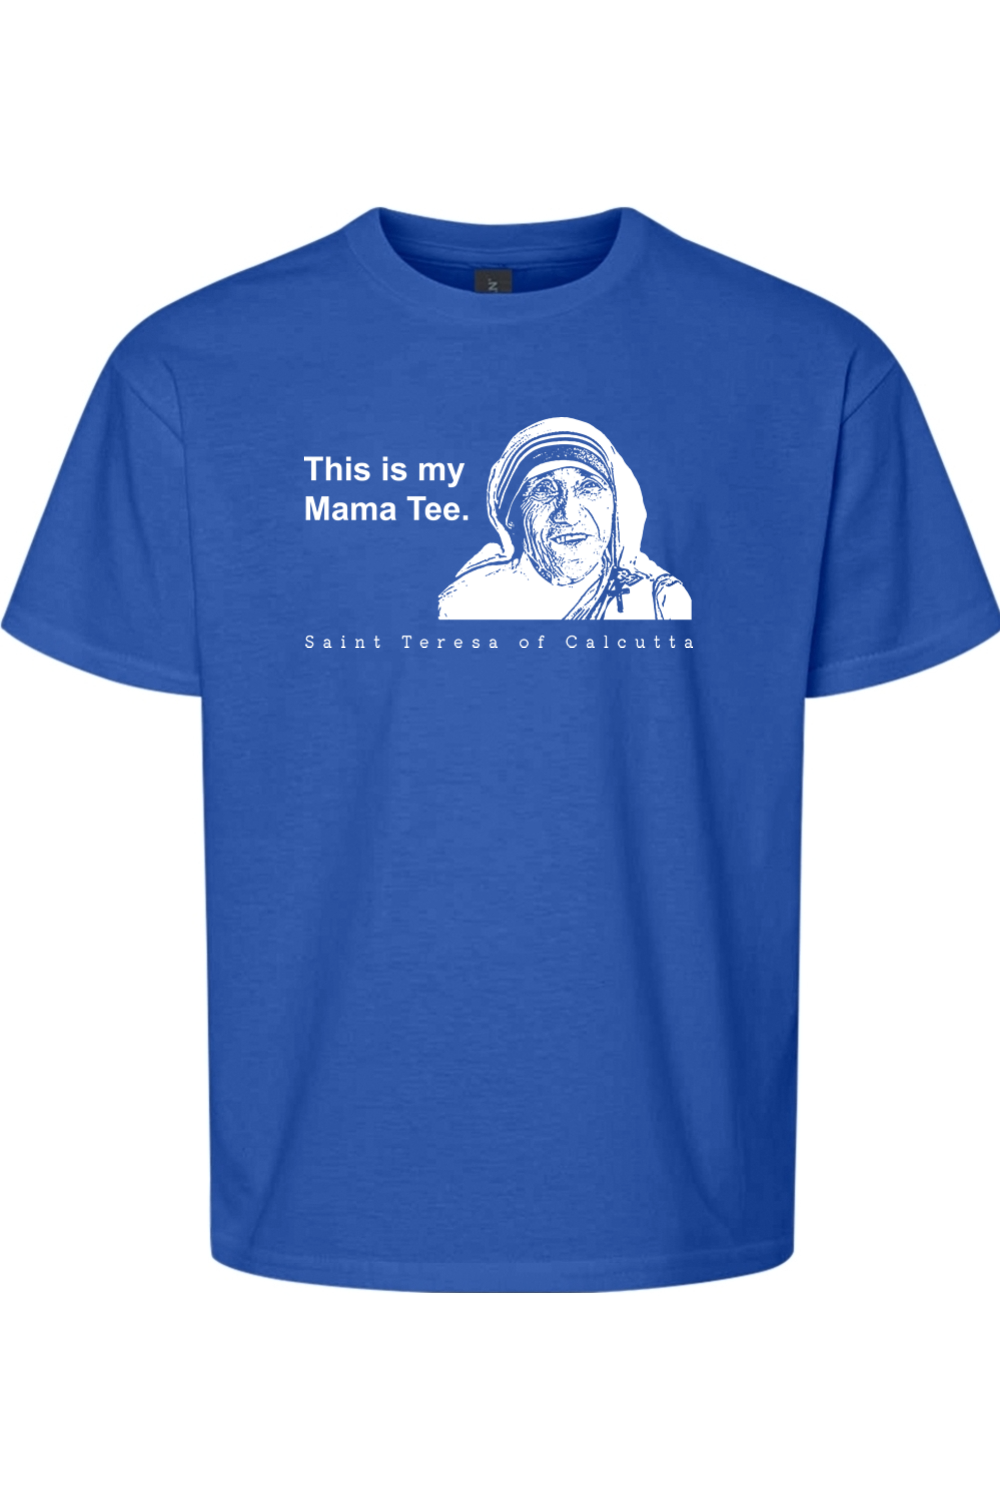 This is my Mama Tee - St. Teresa of Calcutta T-Shirt - youth